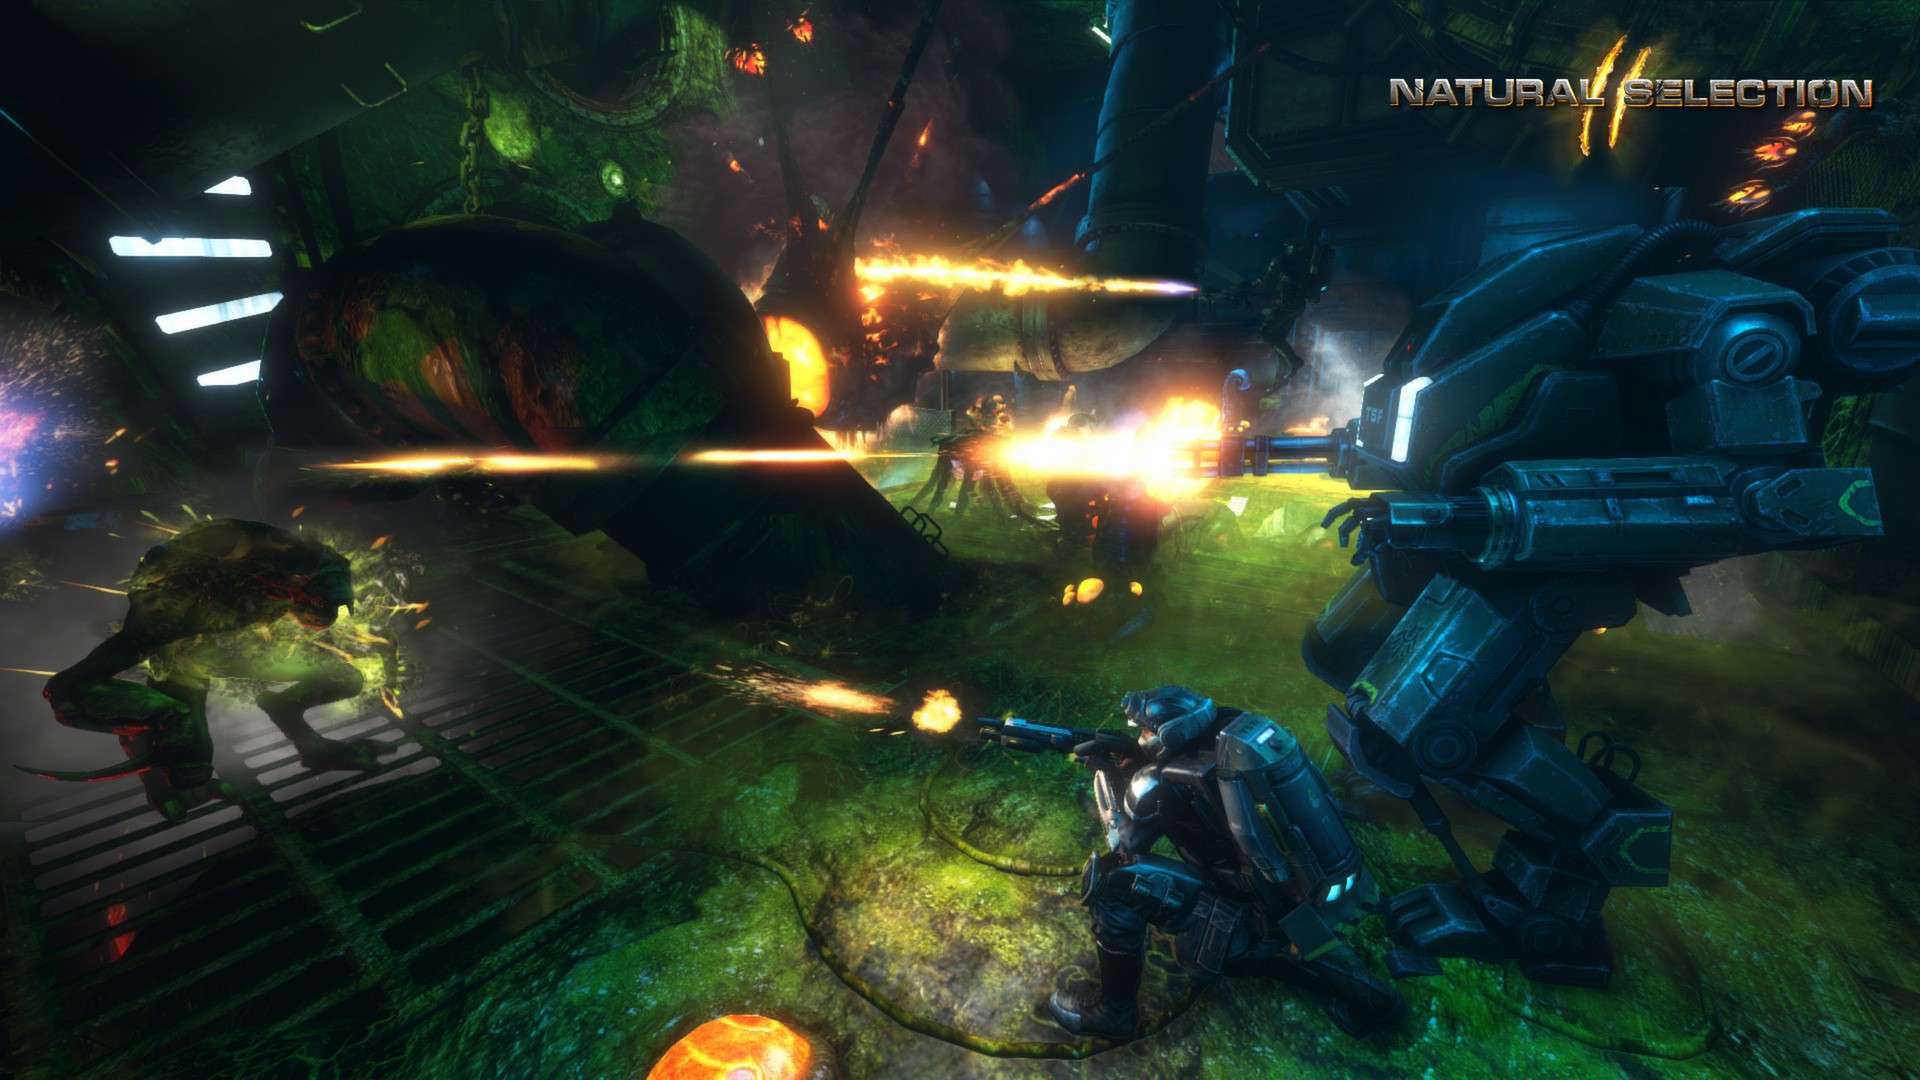 Unearthed Update Now Live for Natural Selection 2